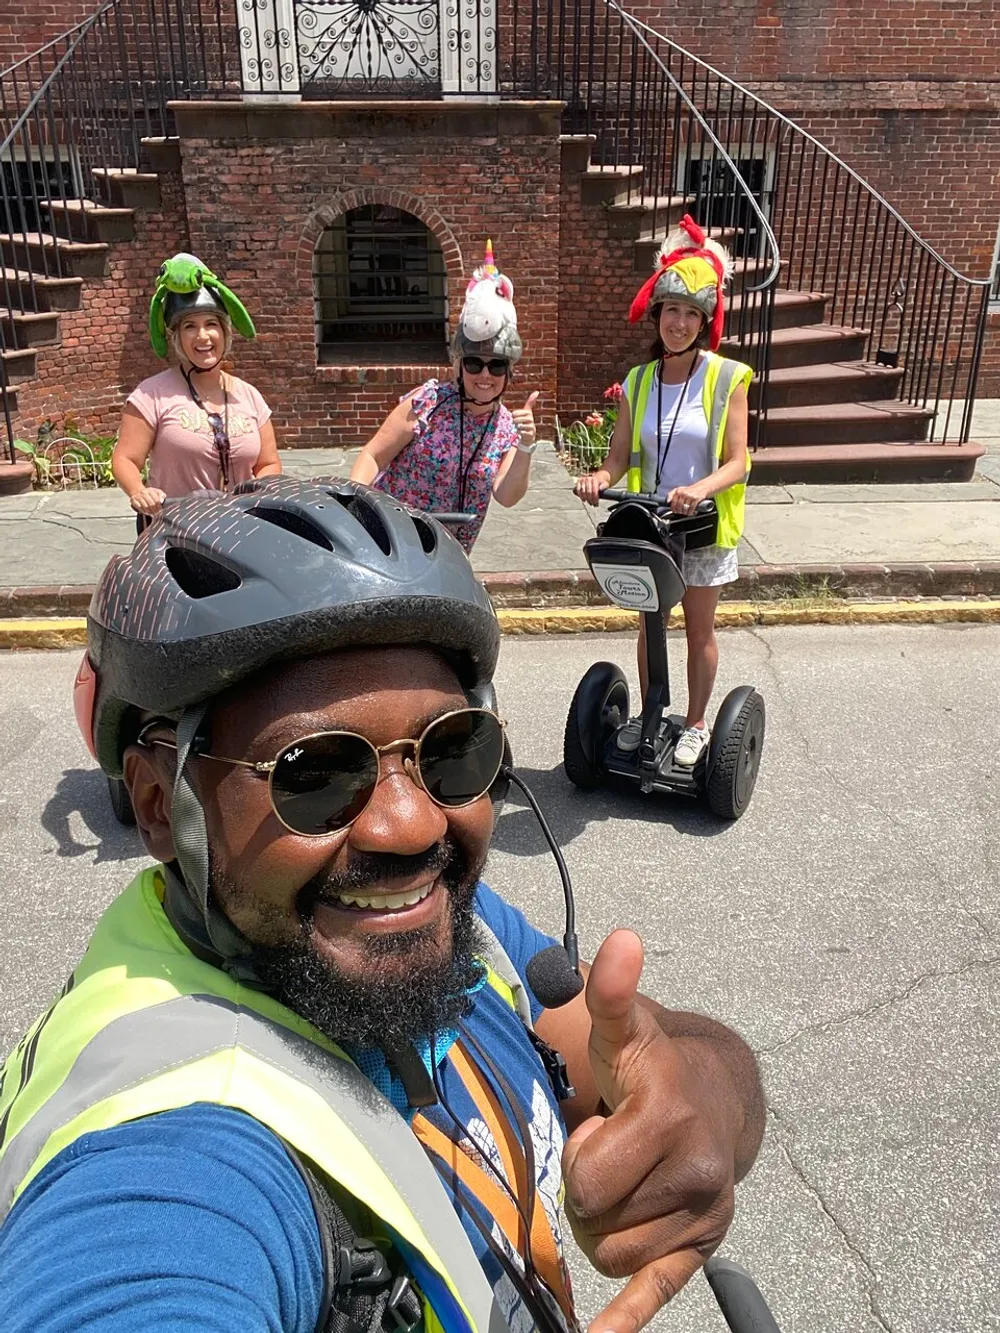 A cheerful group of people wearing fun helmets and safety gear takes a selfie while on a Segway tour